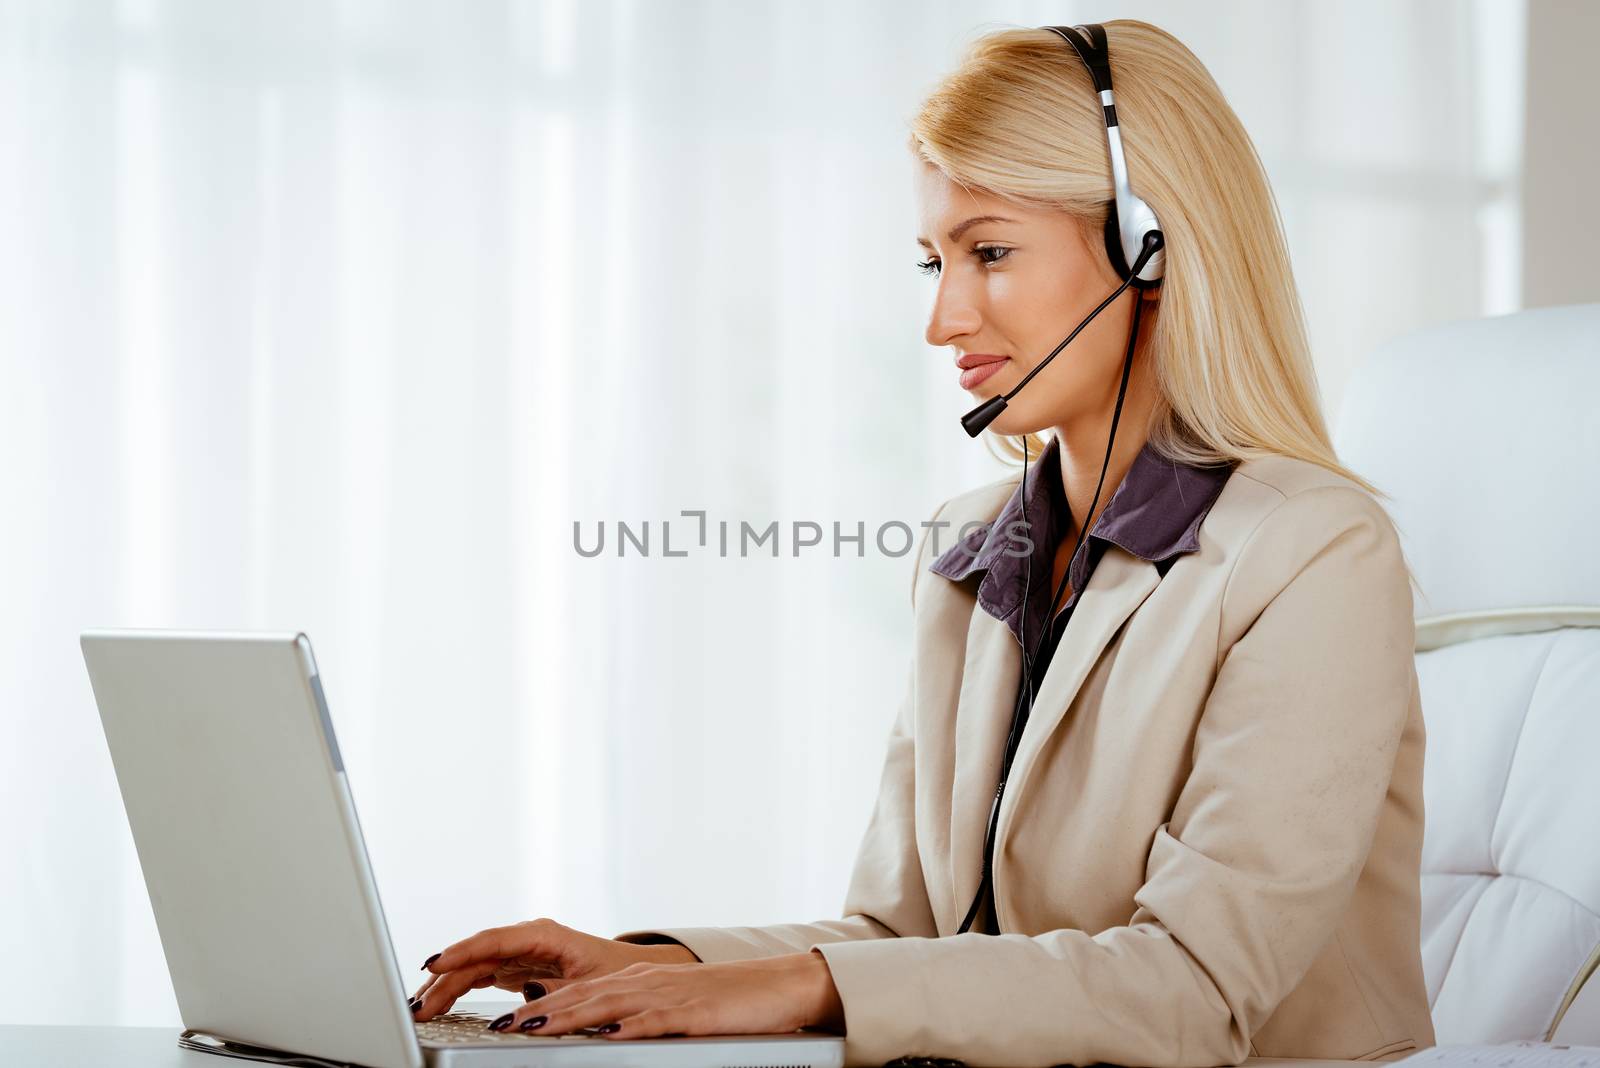 Beautiful smiling woman with a headset on her head using laptop at the office.